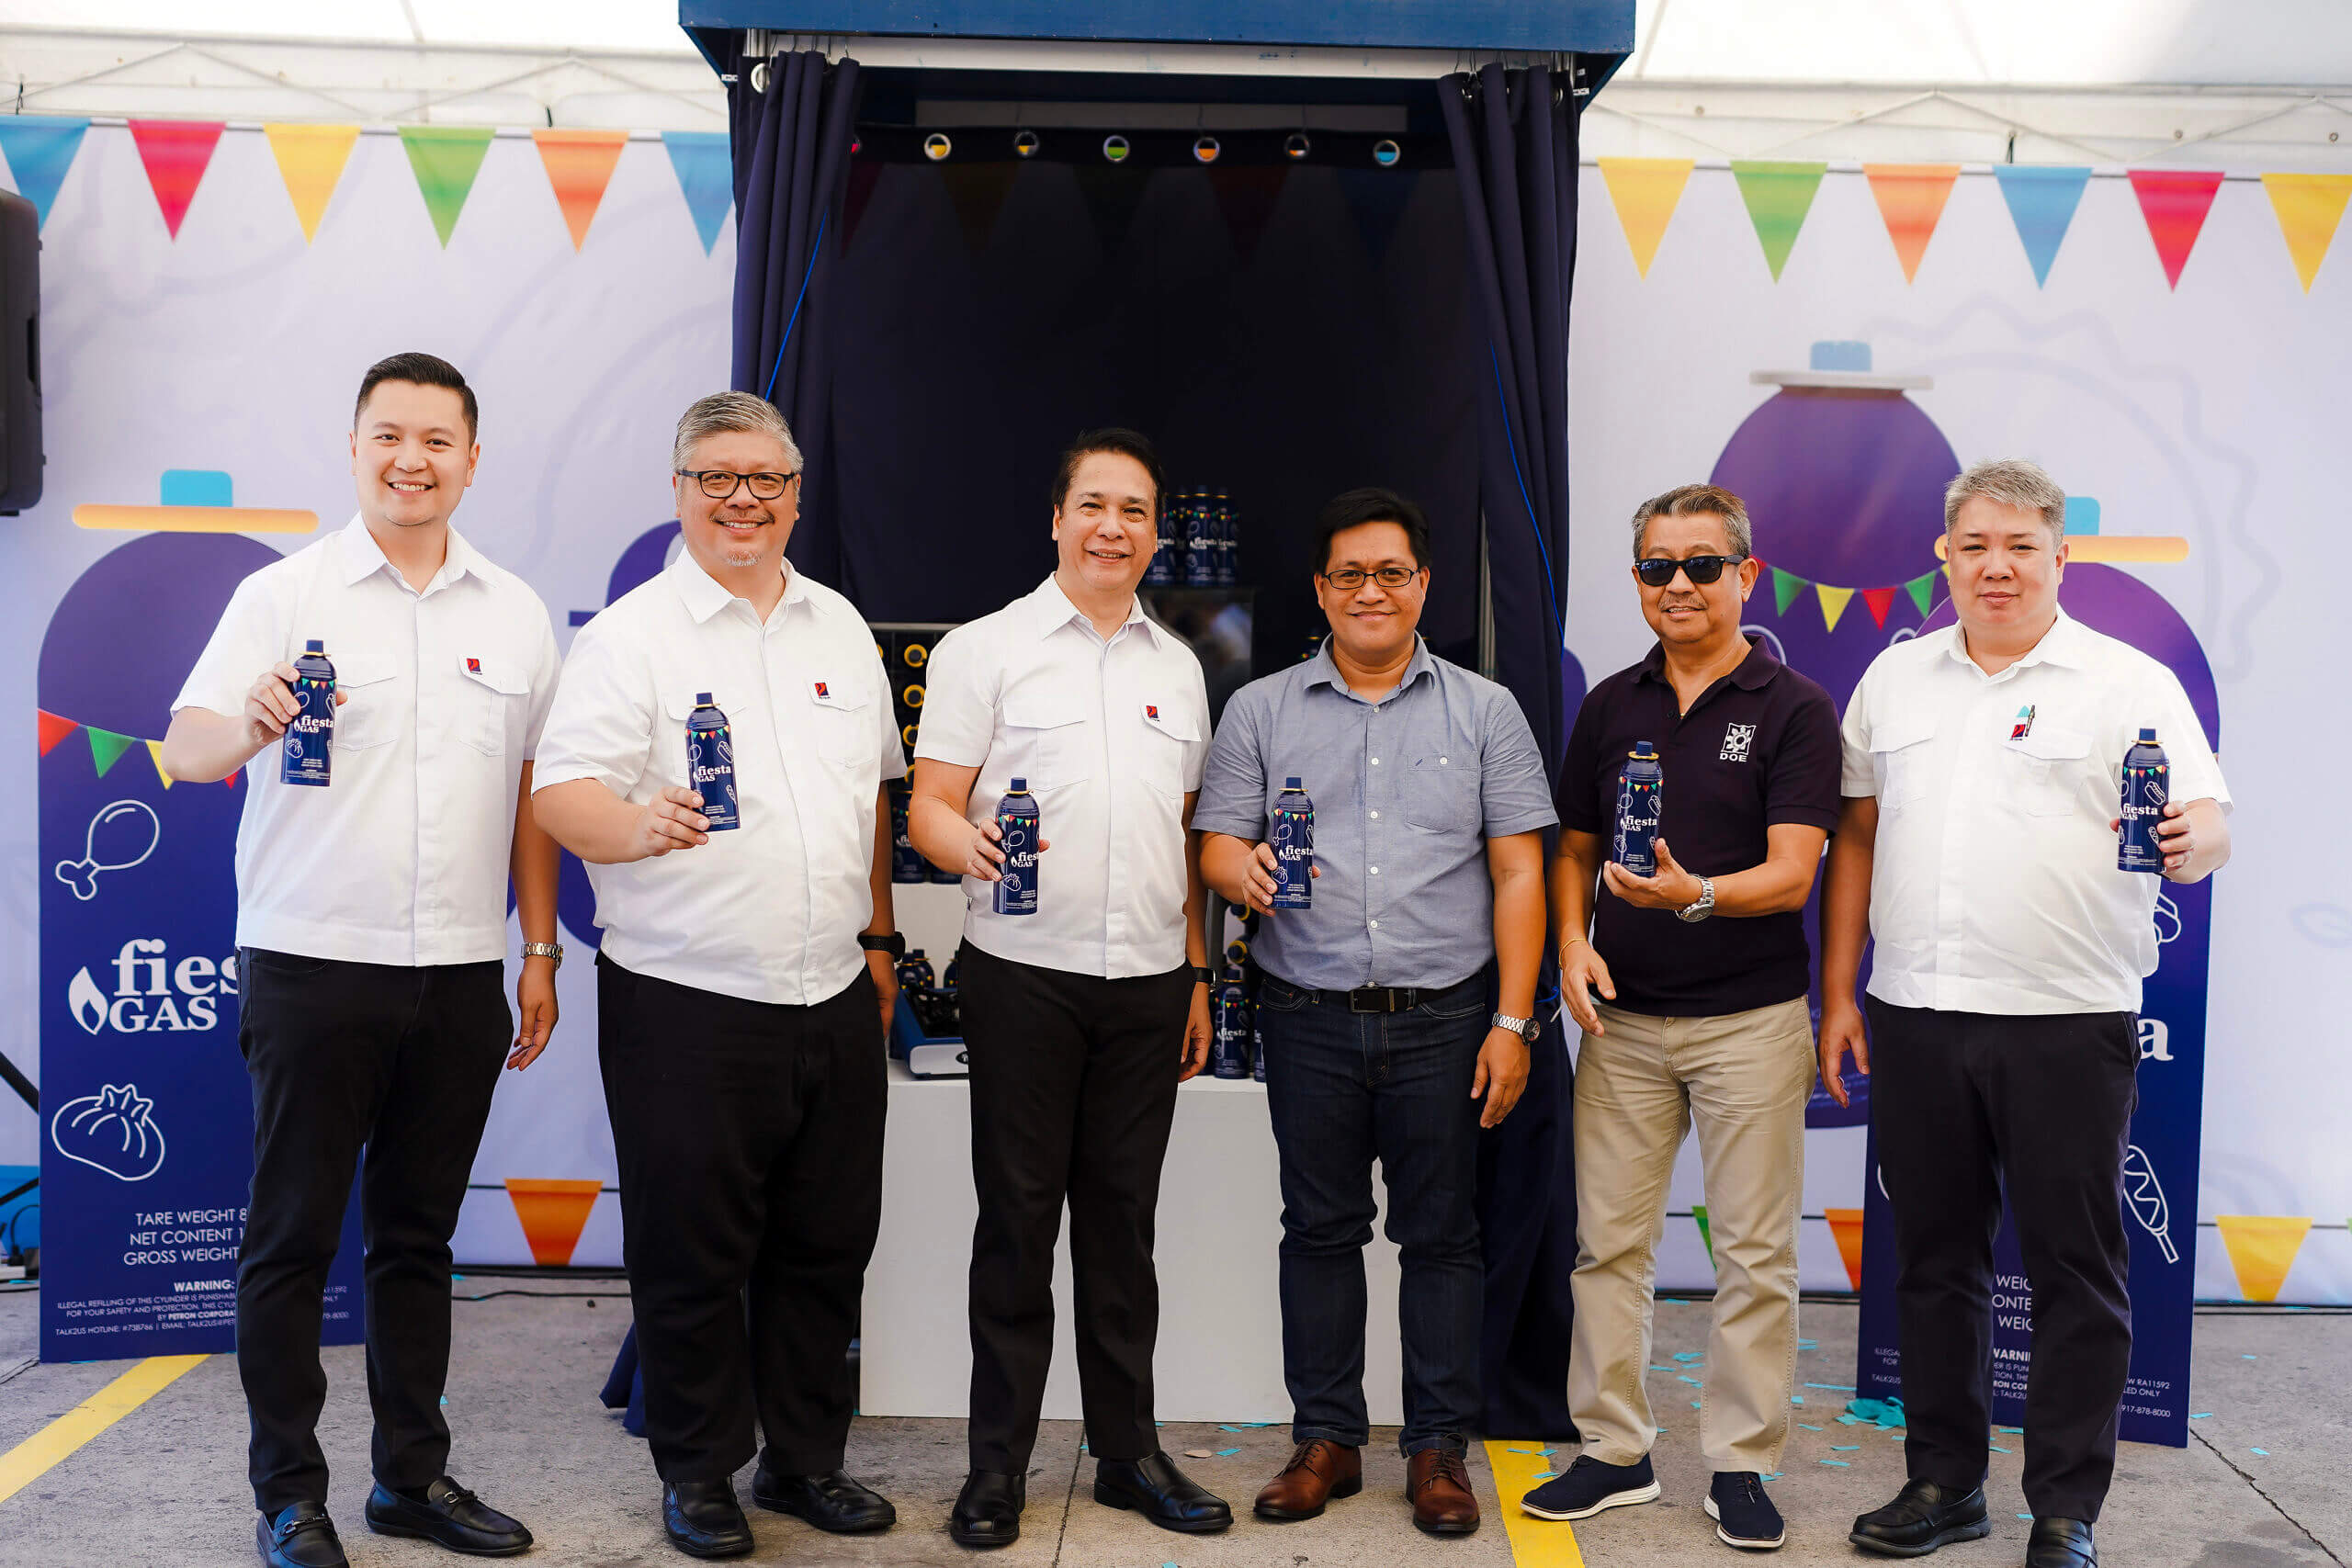 Petron introduces Fiesta Gas refillable LPG cylinder in Luzon